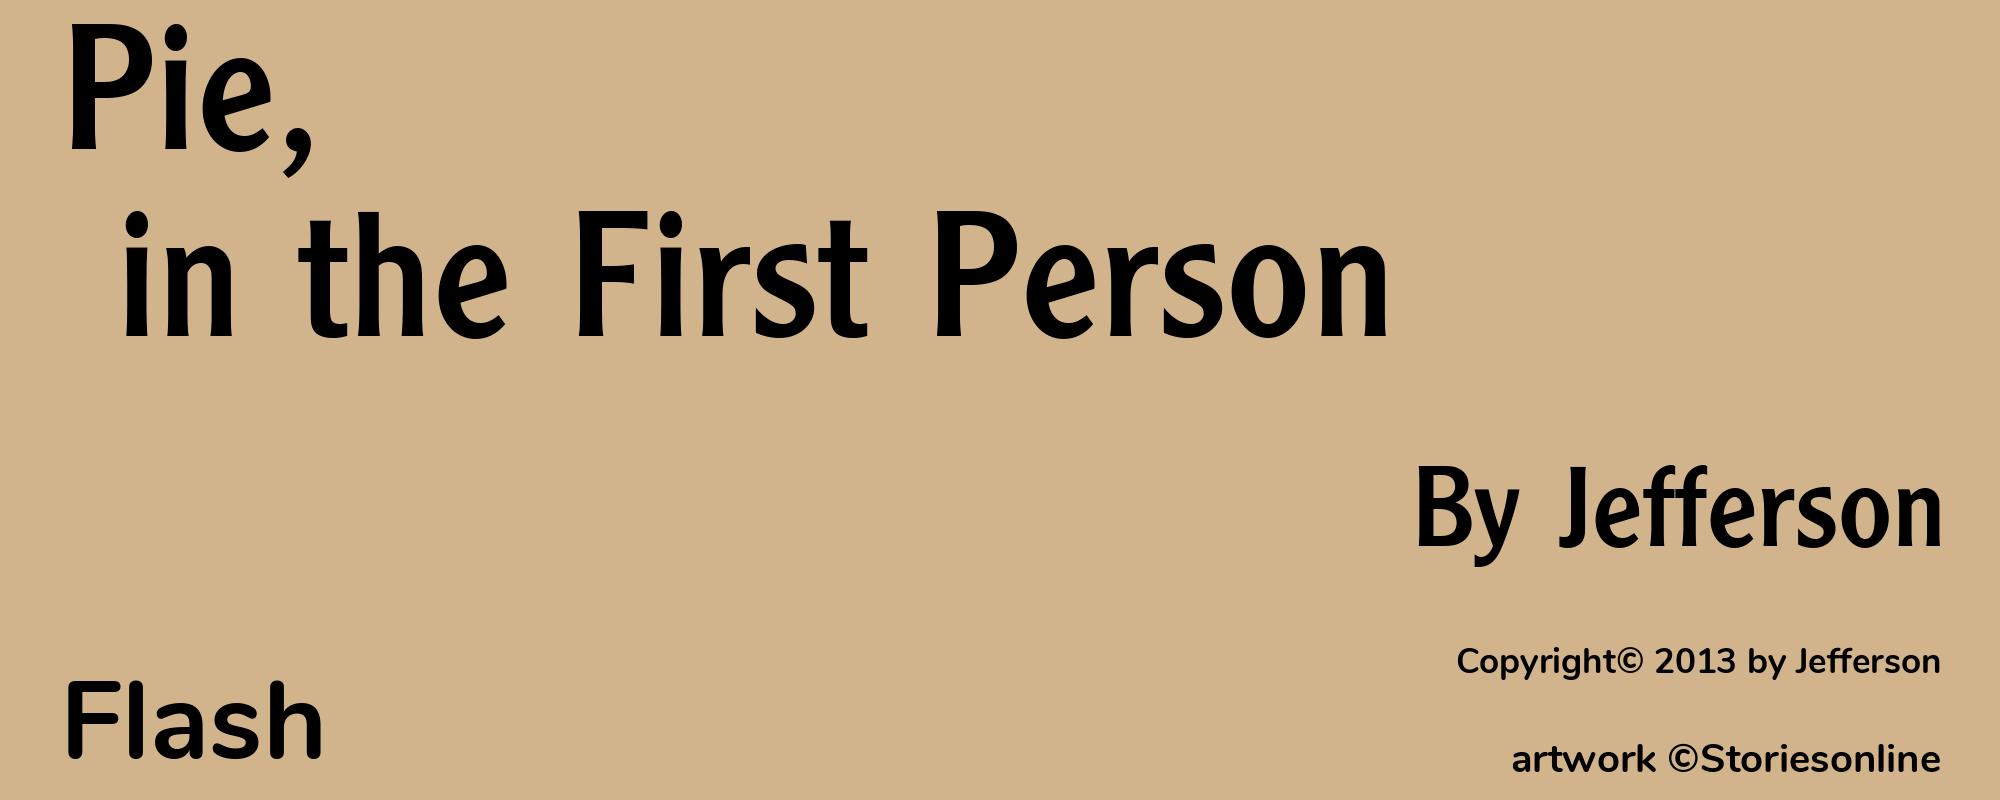 Pie, in the First Person - Cover